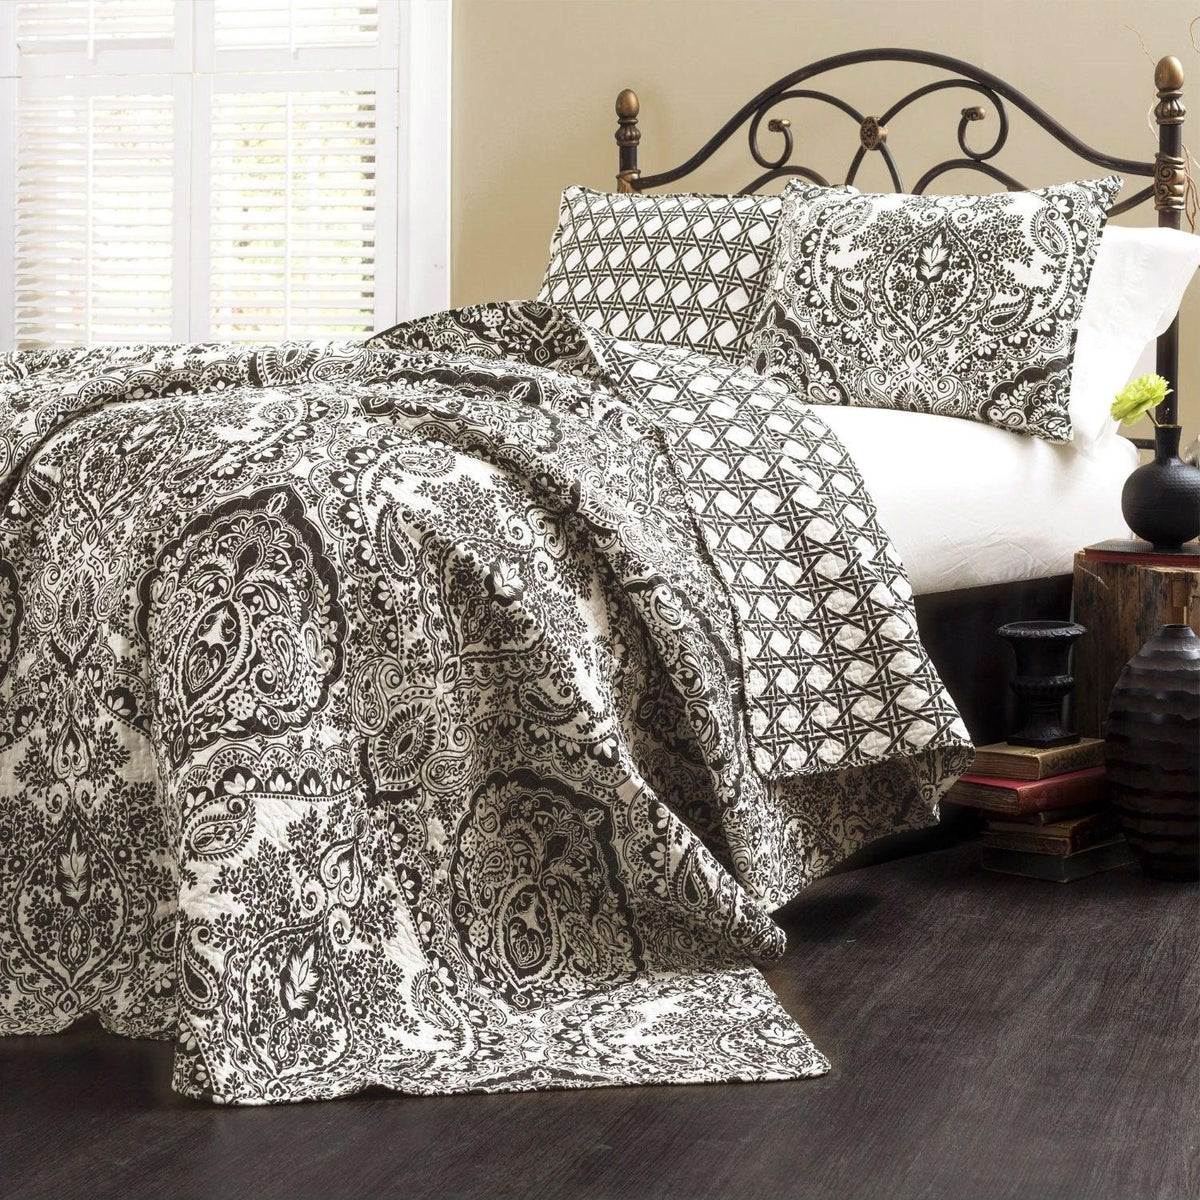 Queen size 3-Piece Quilt Set 100-Percent Cotton in Charcoal Damask